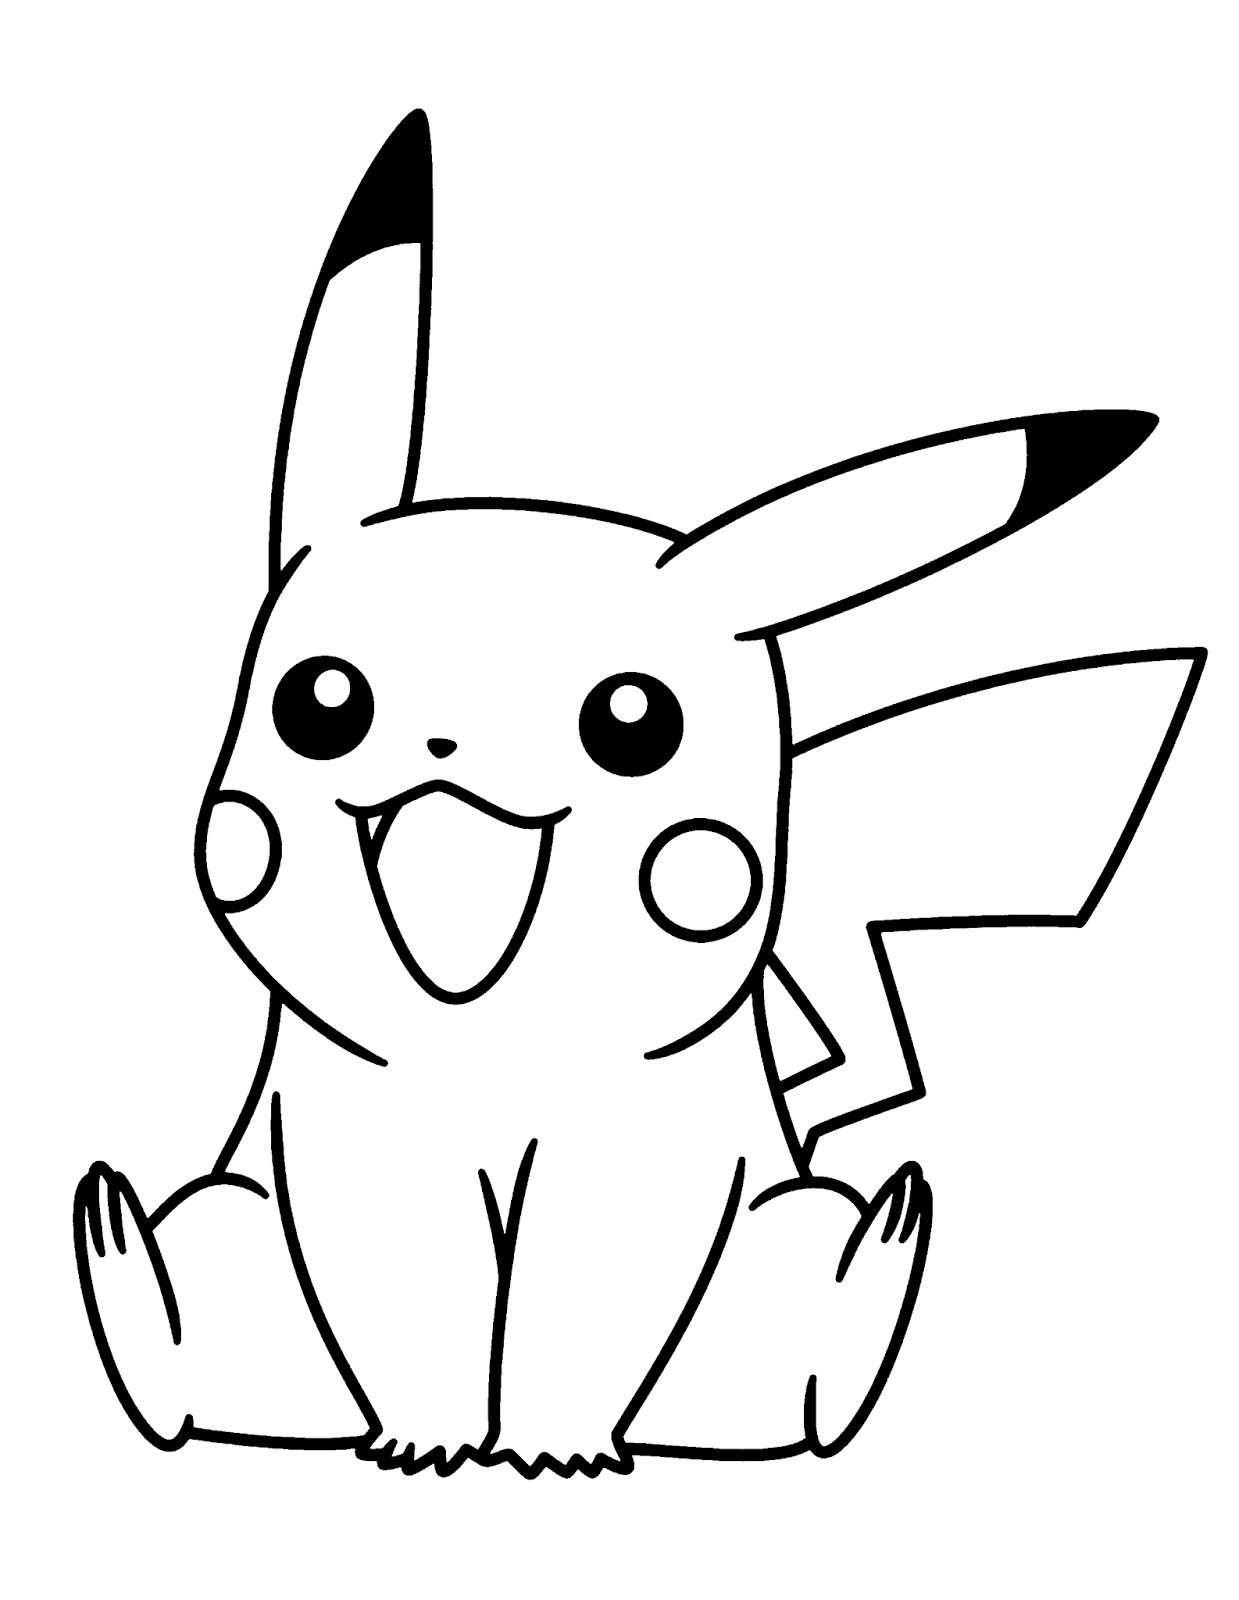 Printable Pokemon Coloring Pages
 Coloring Pages Pokemon Coloring Pages Free and Printable